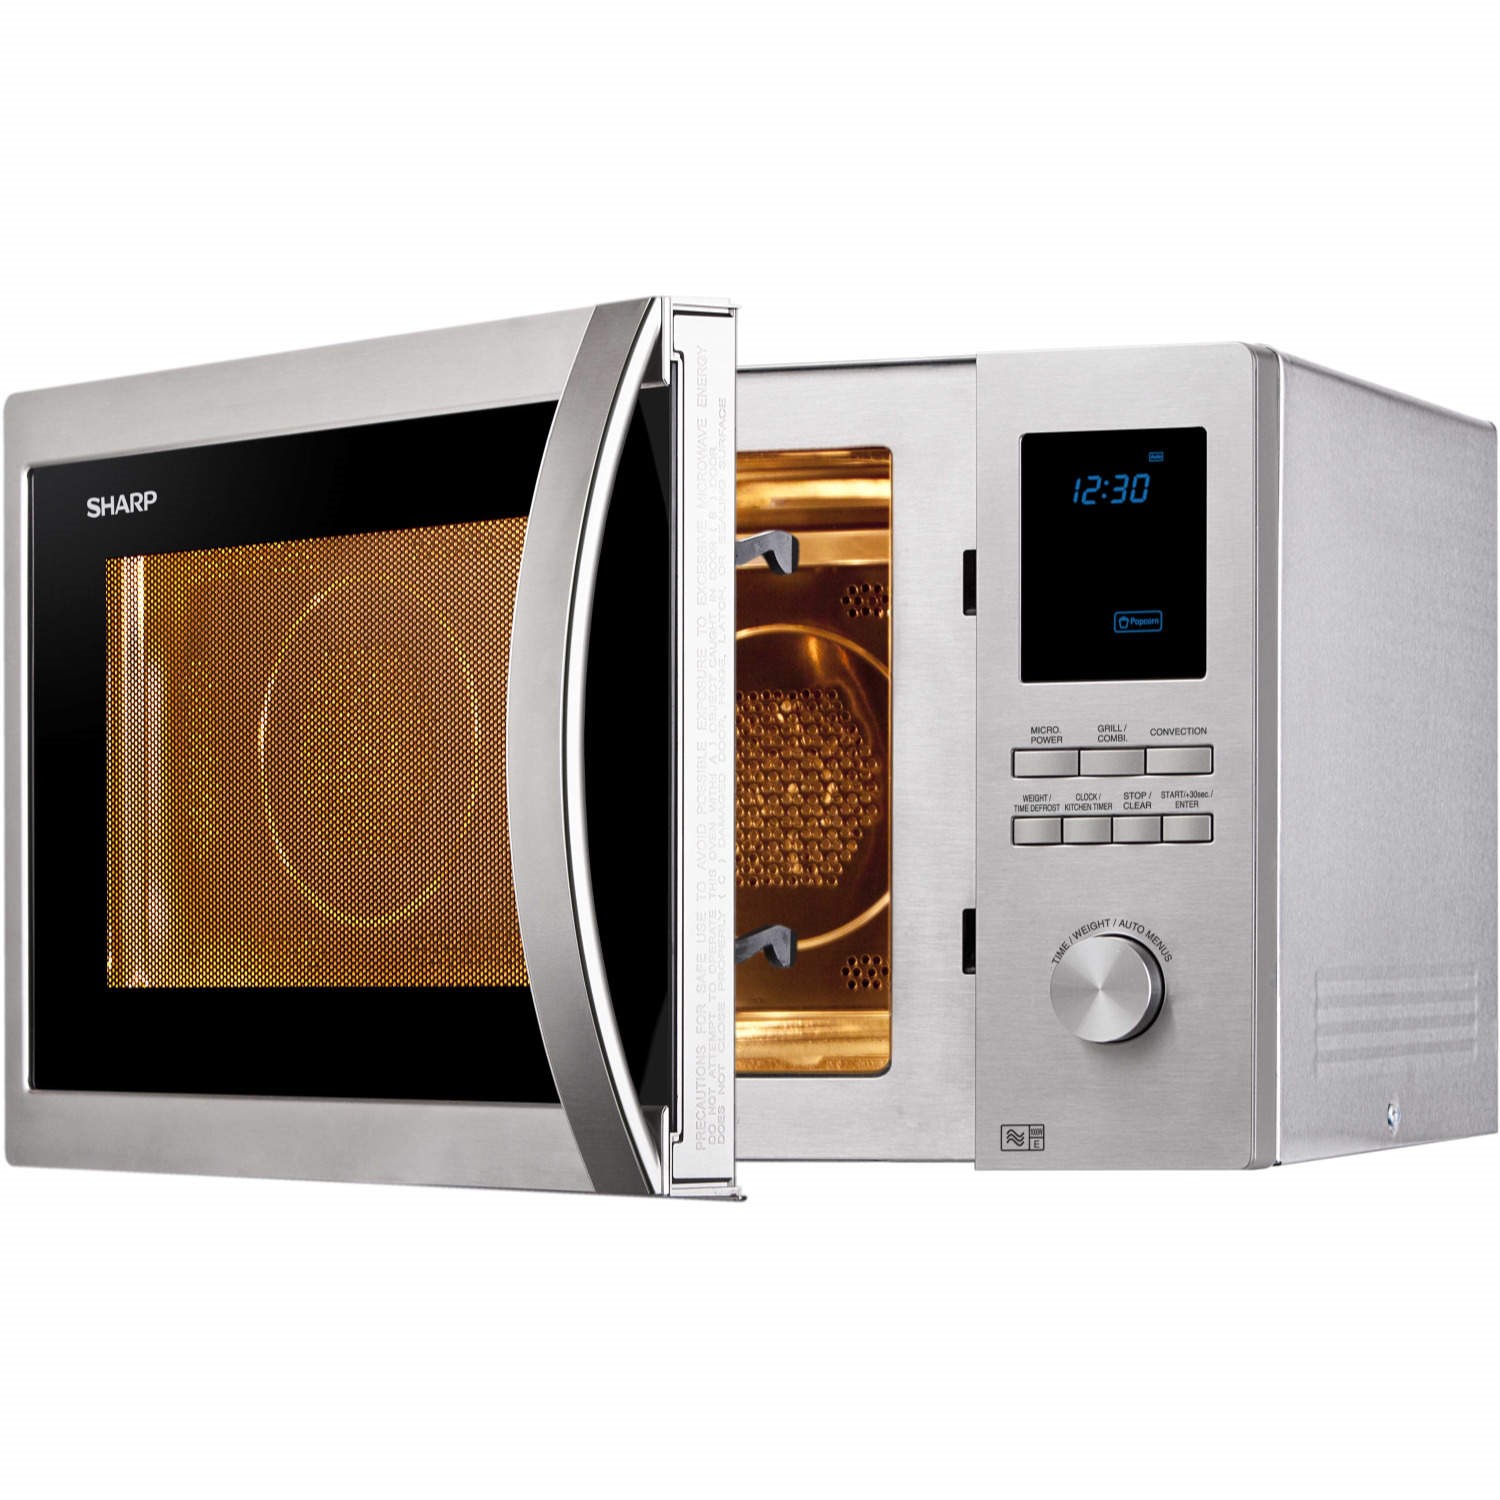 Sharp R982STM 42L 900W Combination Freestanding Microwave in Stainless